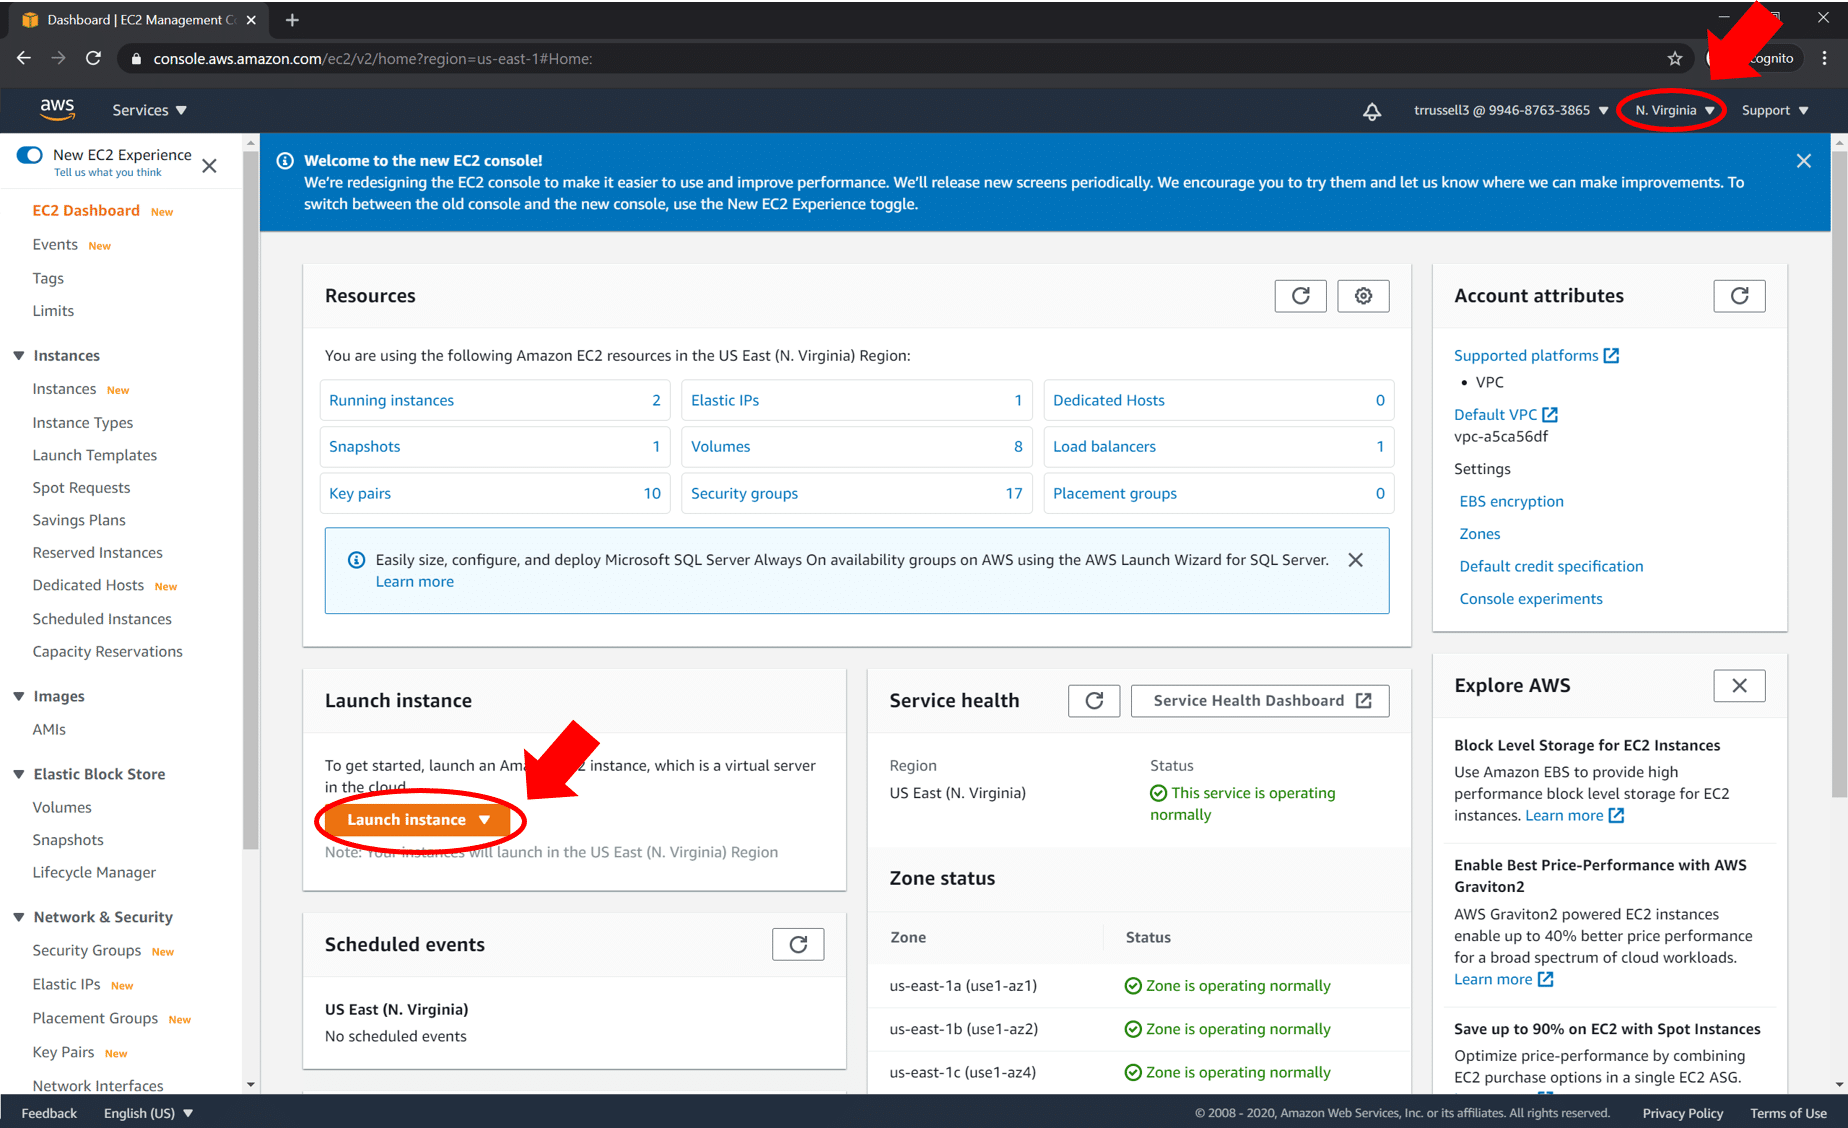 Select the Region and Launch Instance